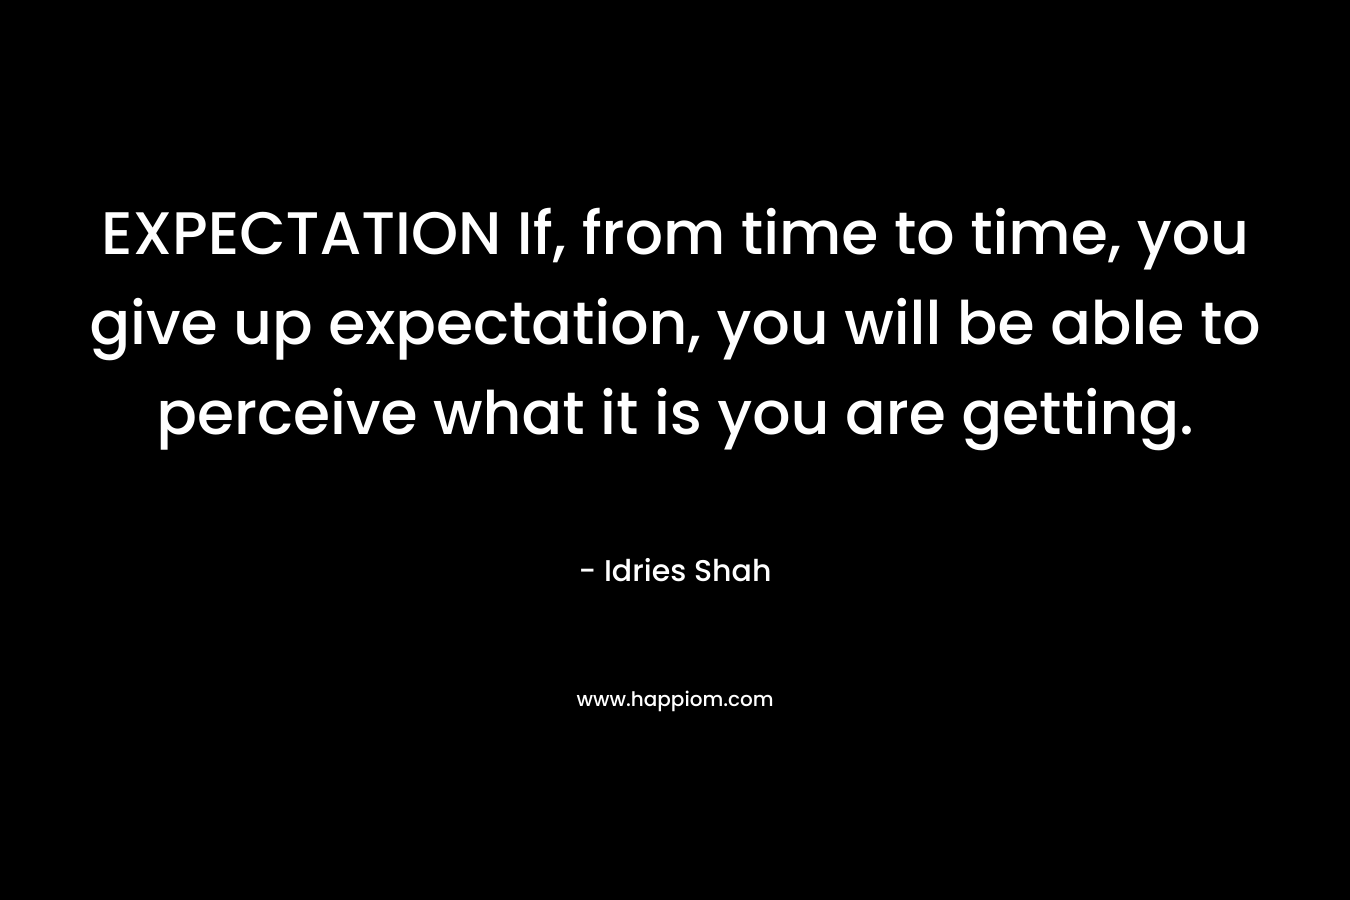 EXPECTATION If, from time to time, you give up expectation, you will be able to perceive what it is you are getting.